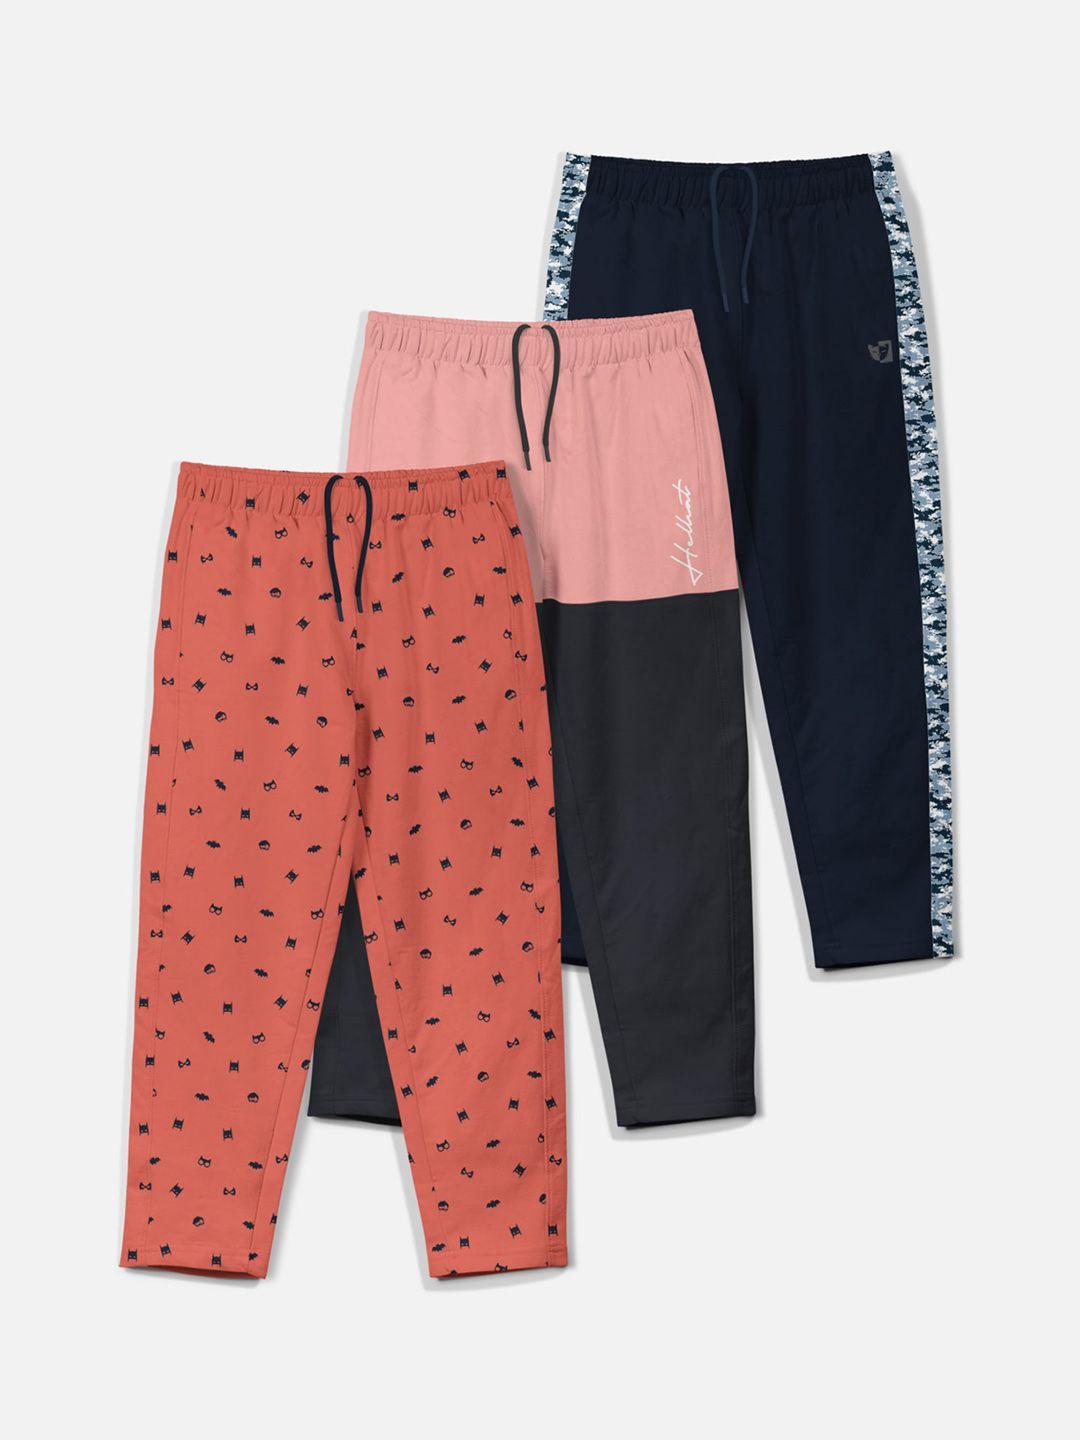 hellcat-boys-pack-of-3-conversational-printed-mid-rise-cotton-track-pants